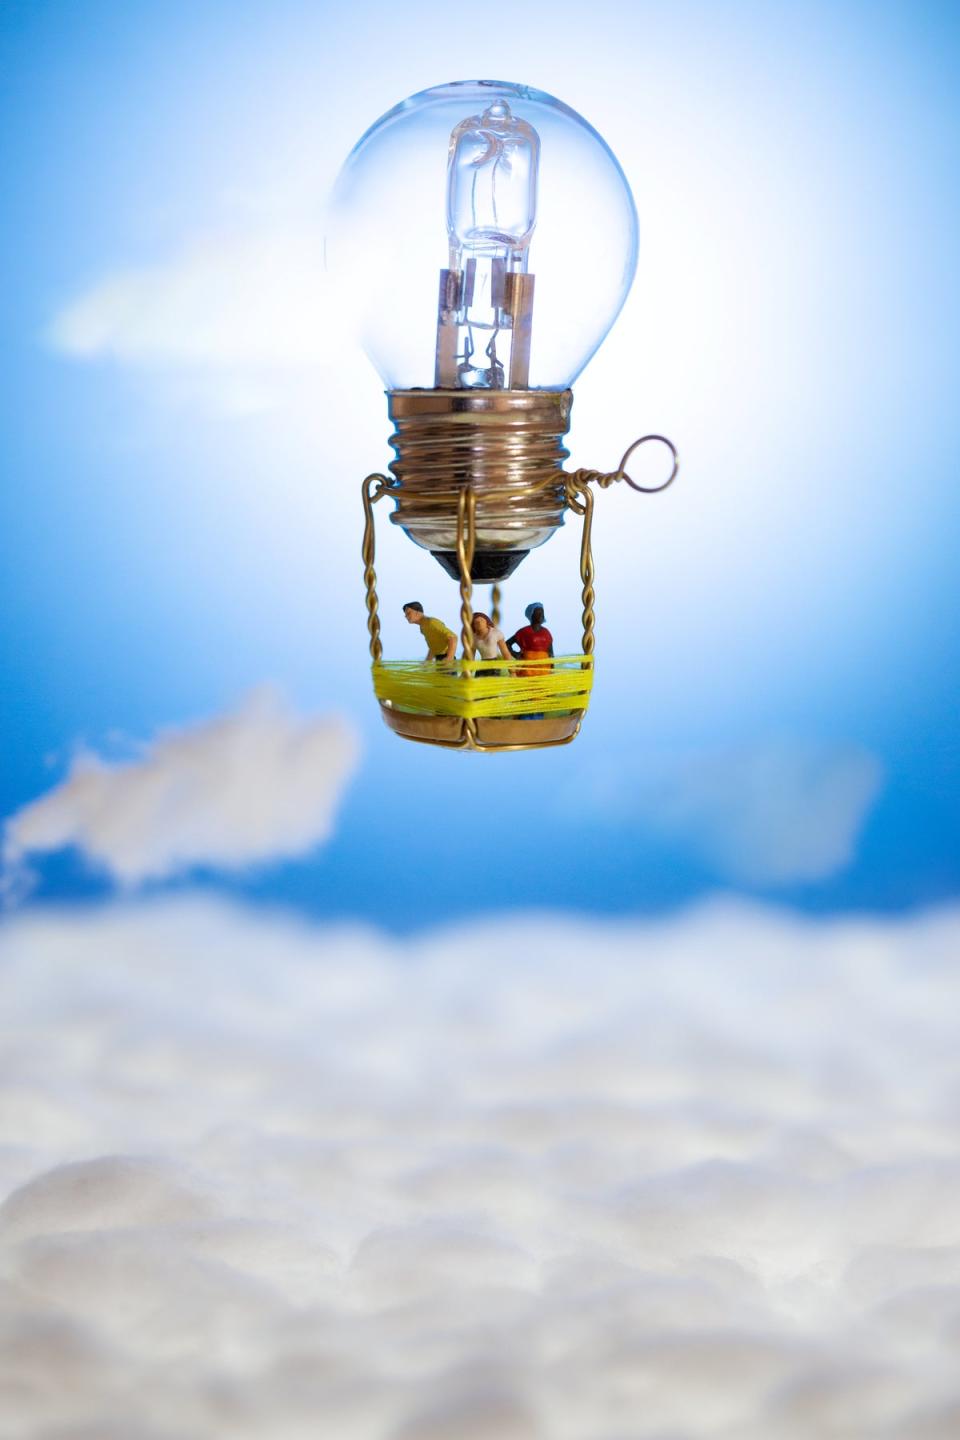 A lightbulb becomes a hot air balloon above the clouds (David Gilliver/SWNS)